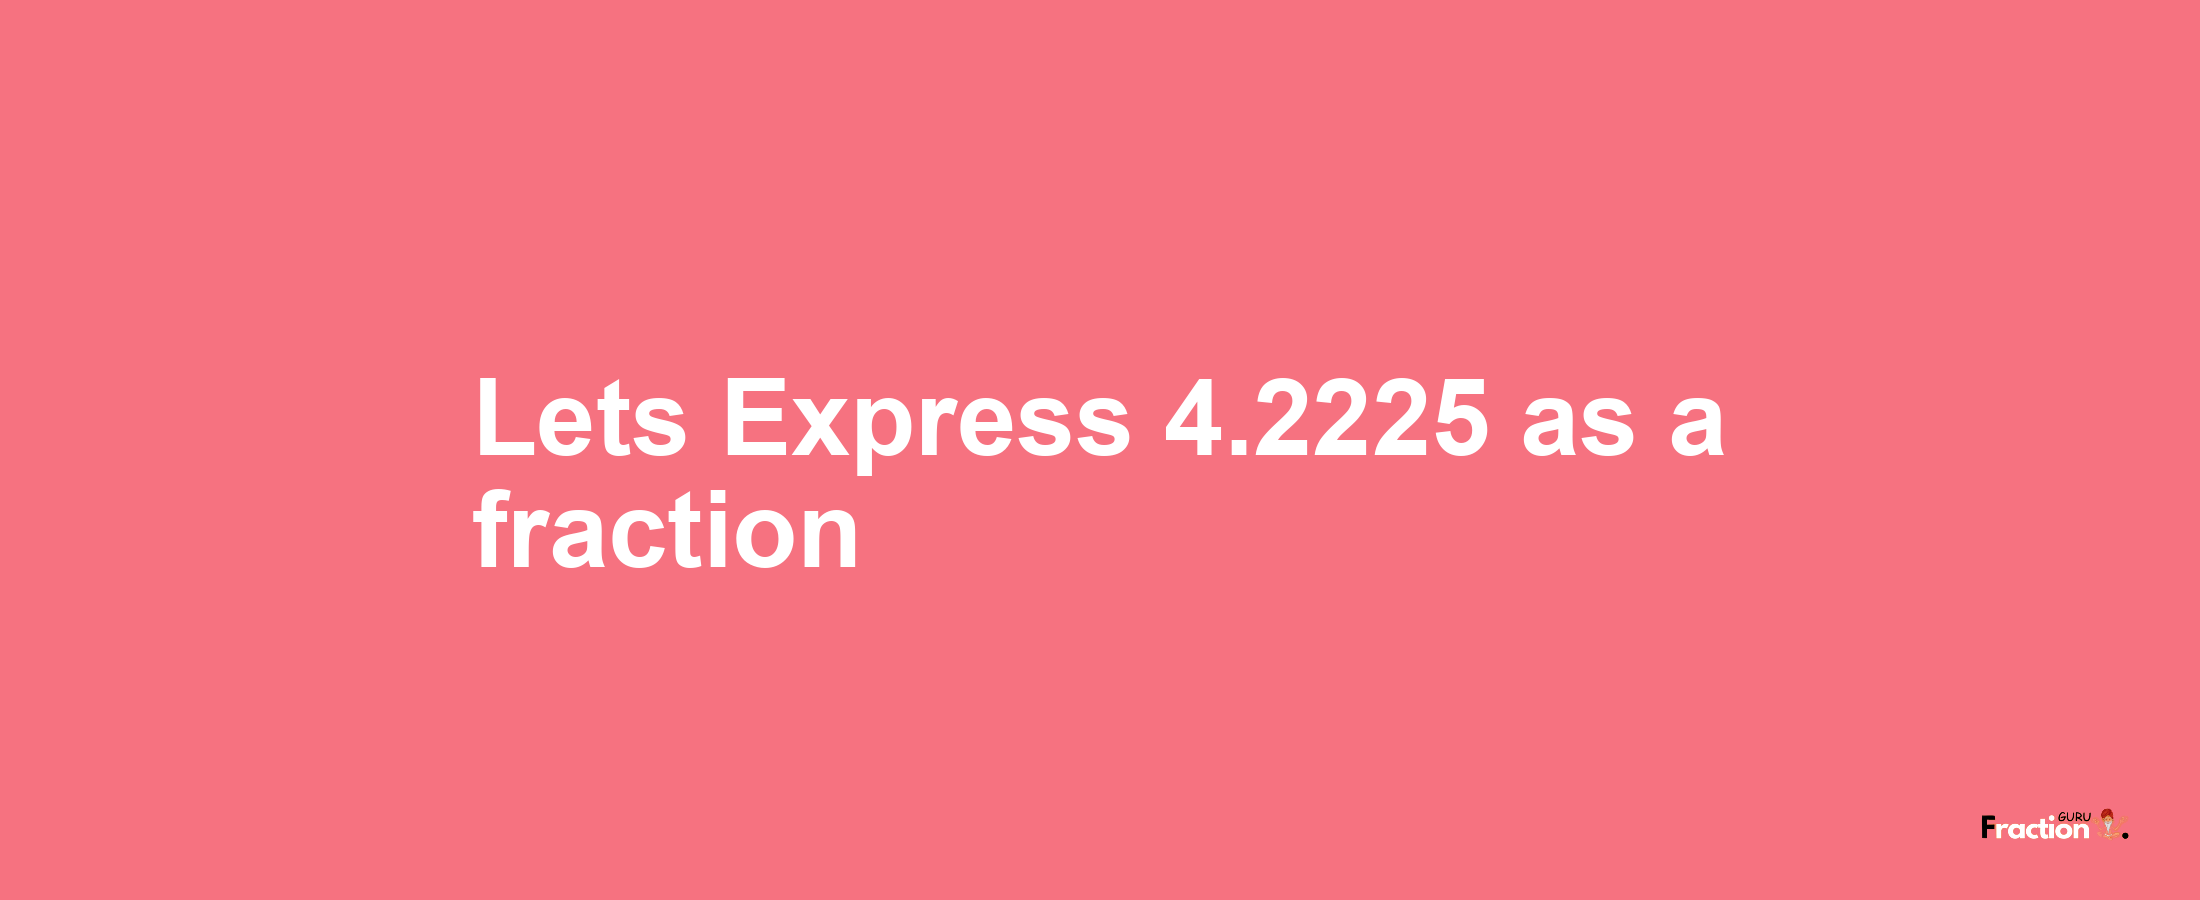 Lets Express 4.2225 as afraction